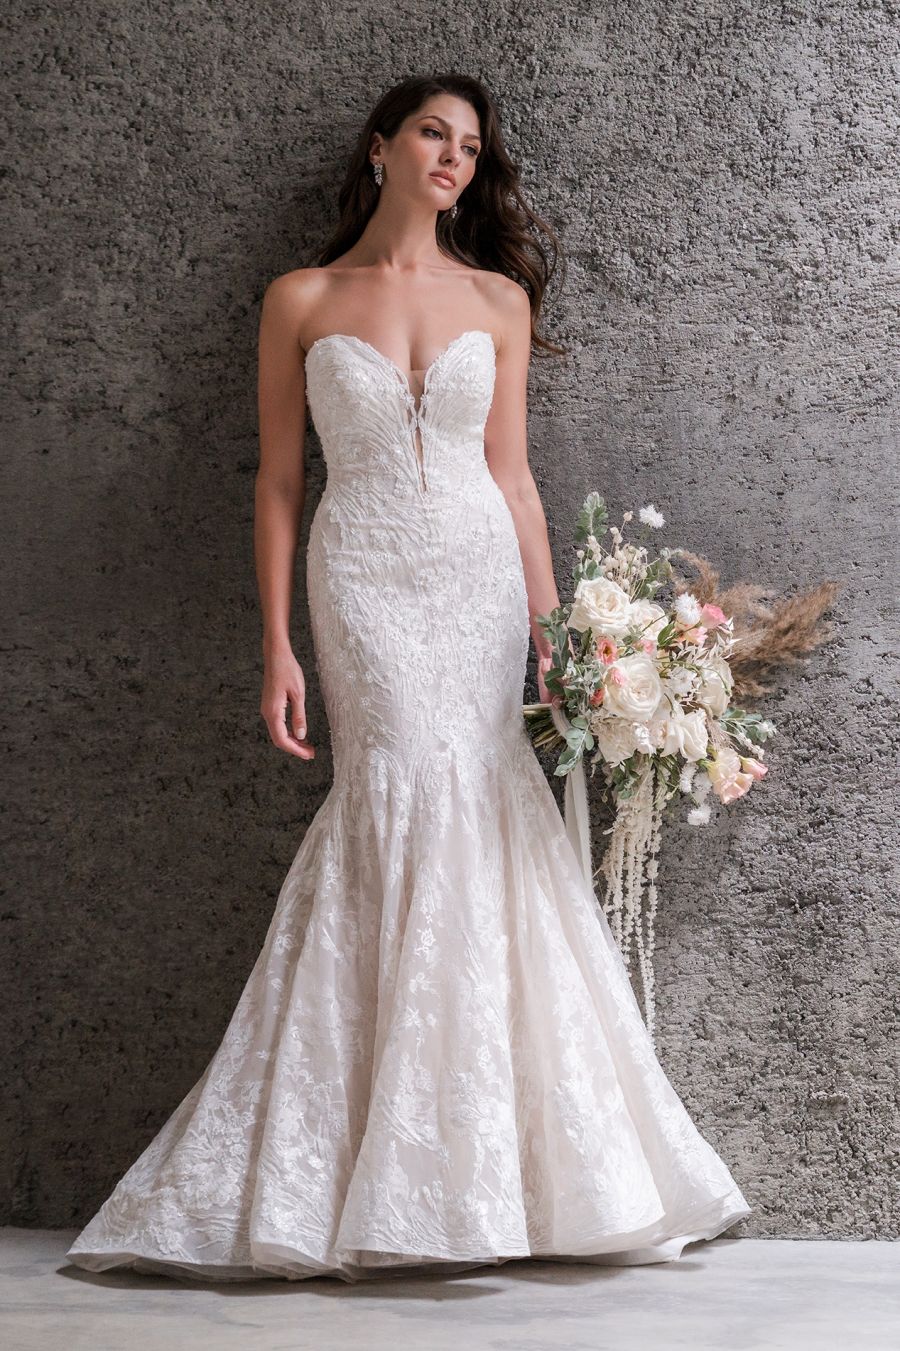 Strapless Sweetheart Neckline Lace Fit And Flare Wedding Dress